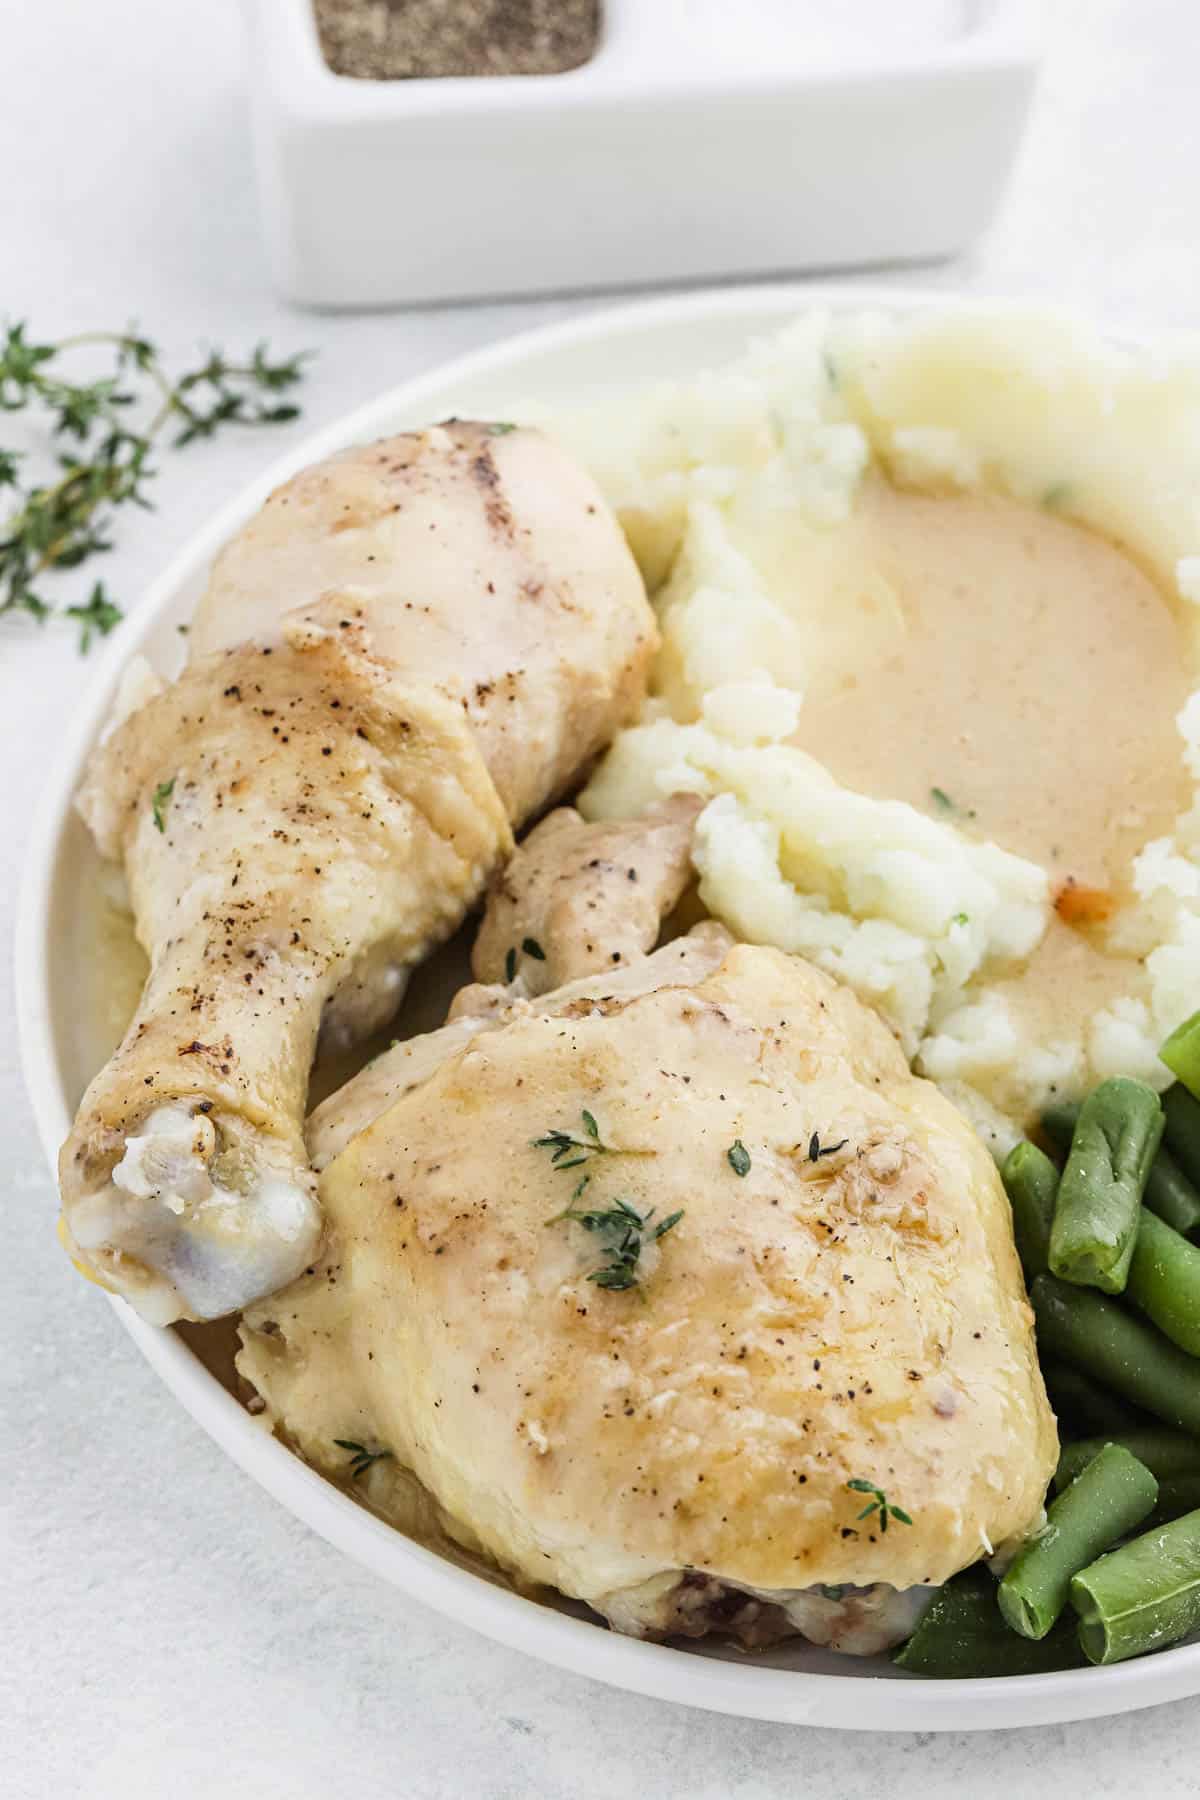 Chicken and gravy in a plate with mashed potatoes and green beans